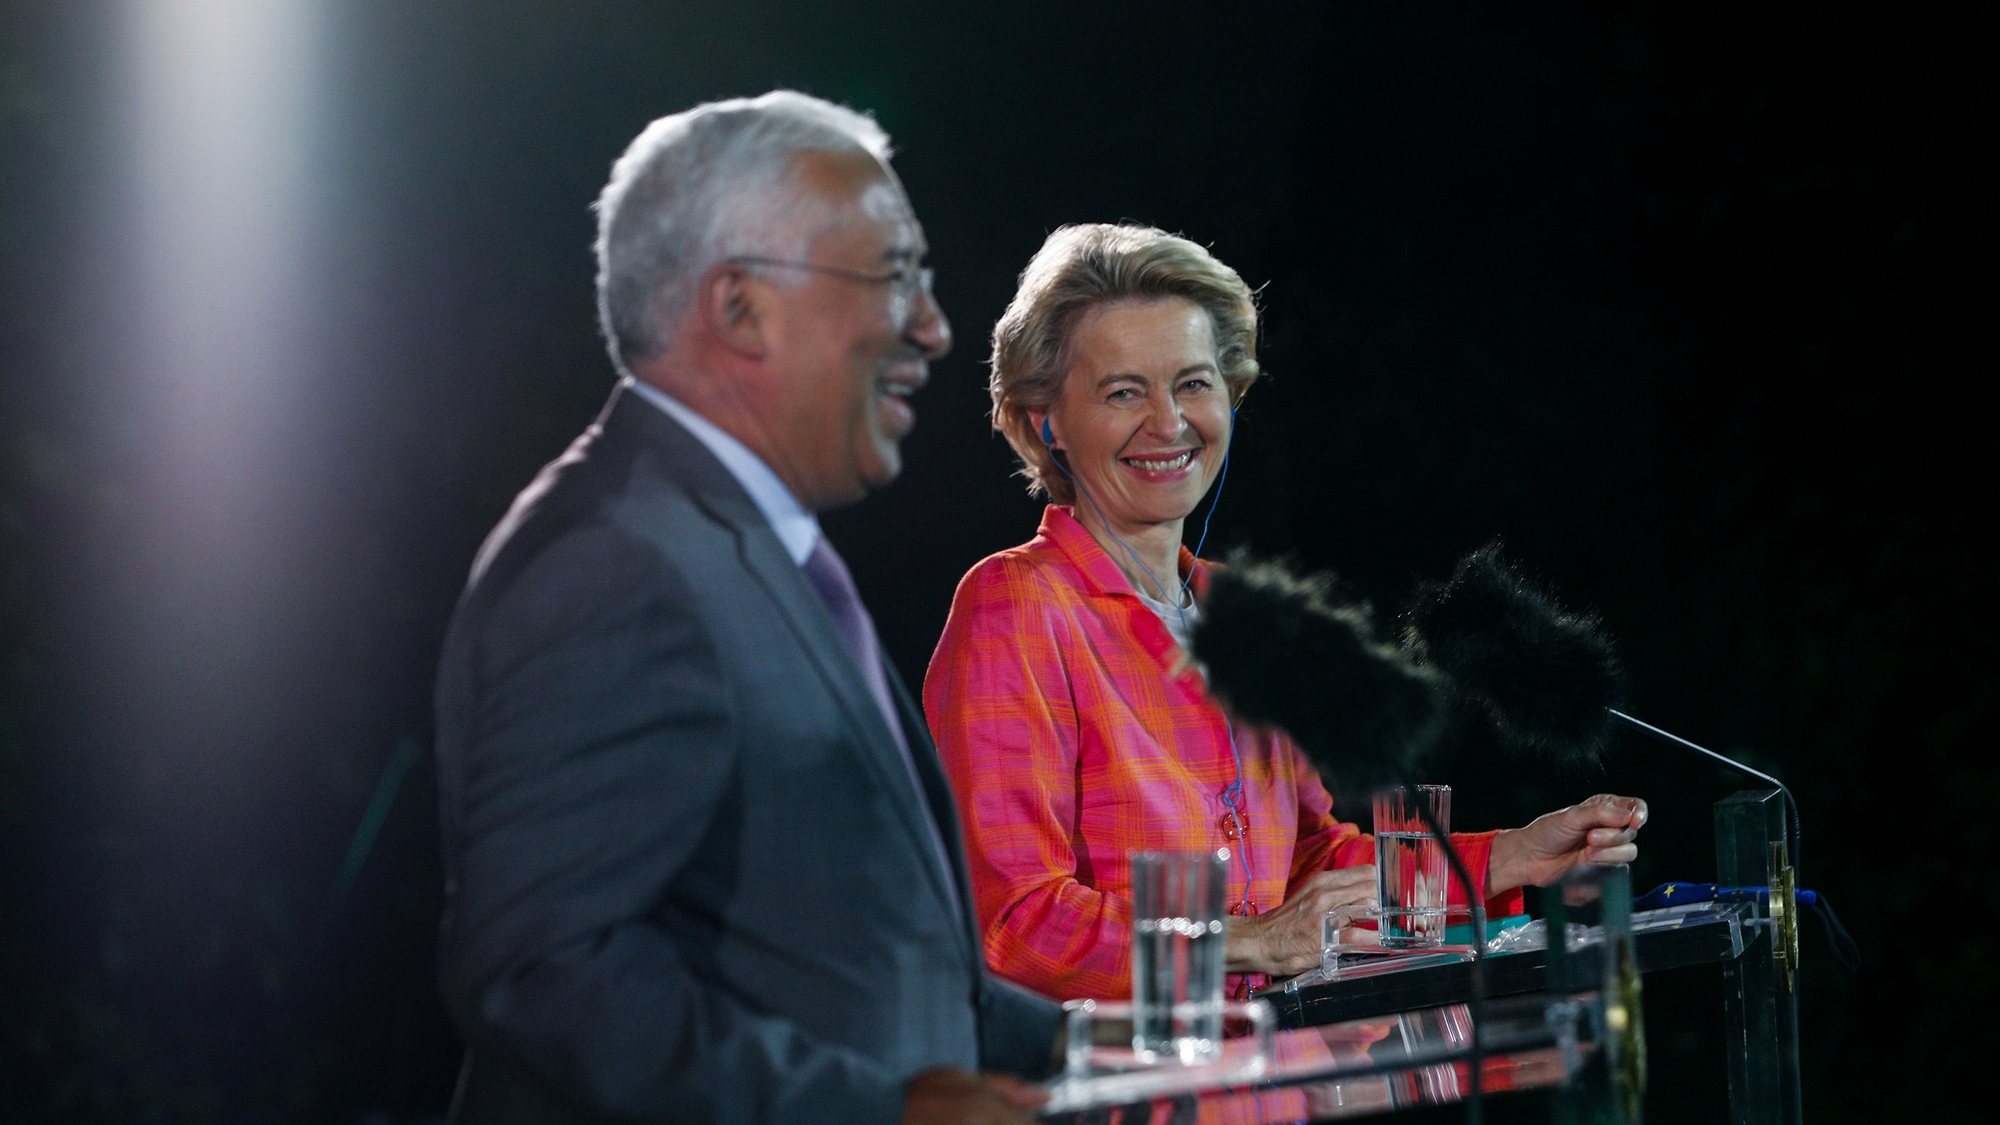 European Commission President Ursula von der Leyen and Portuguese Prime Minister Antonio Costa during a press conference after their meeting at Sao Bento Palace in Lisbon, Portugal, 28th September 2020. Ursula von der Leye is in Lisbon for a two-day official visit. ANTONIO COTRIM/ LUSA